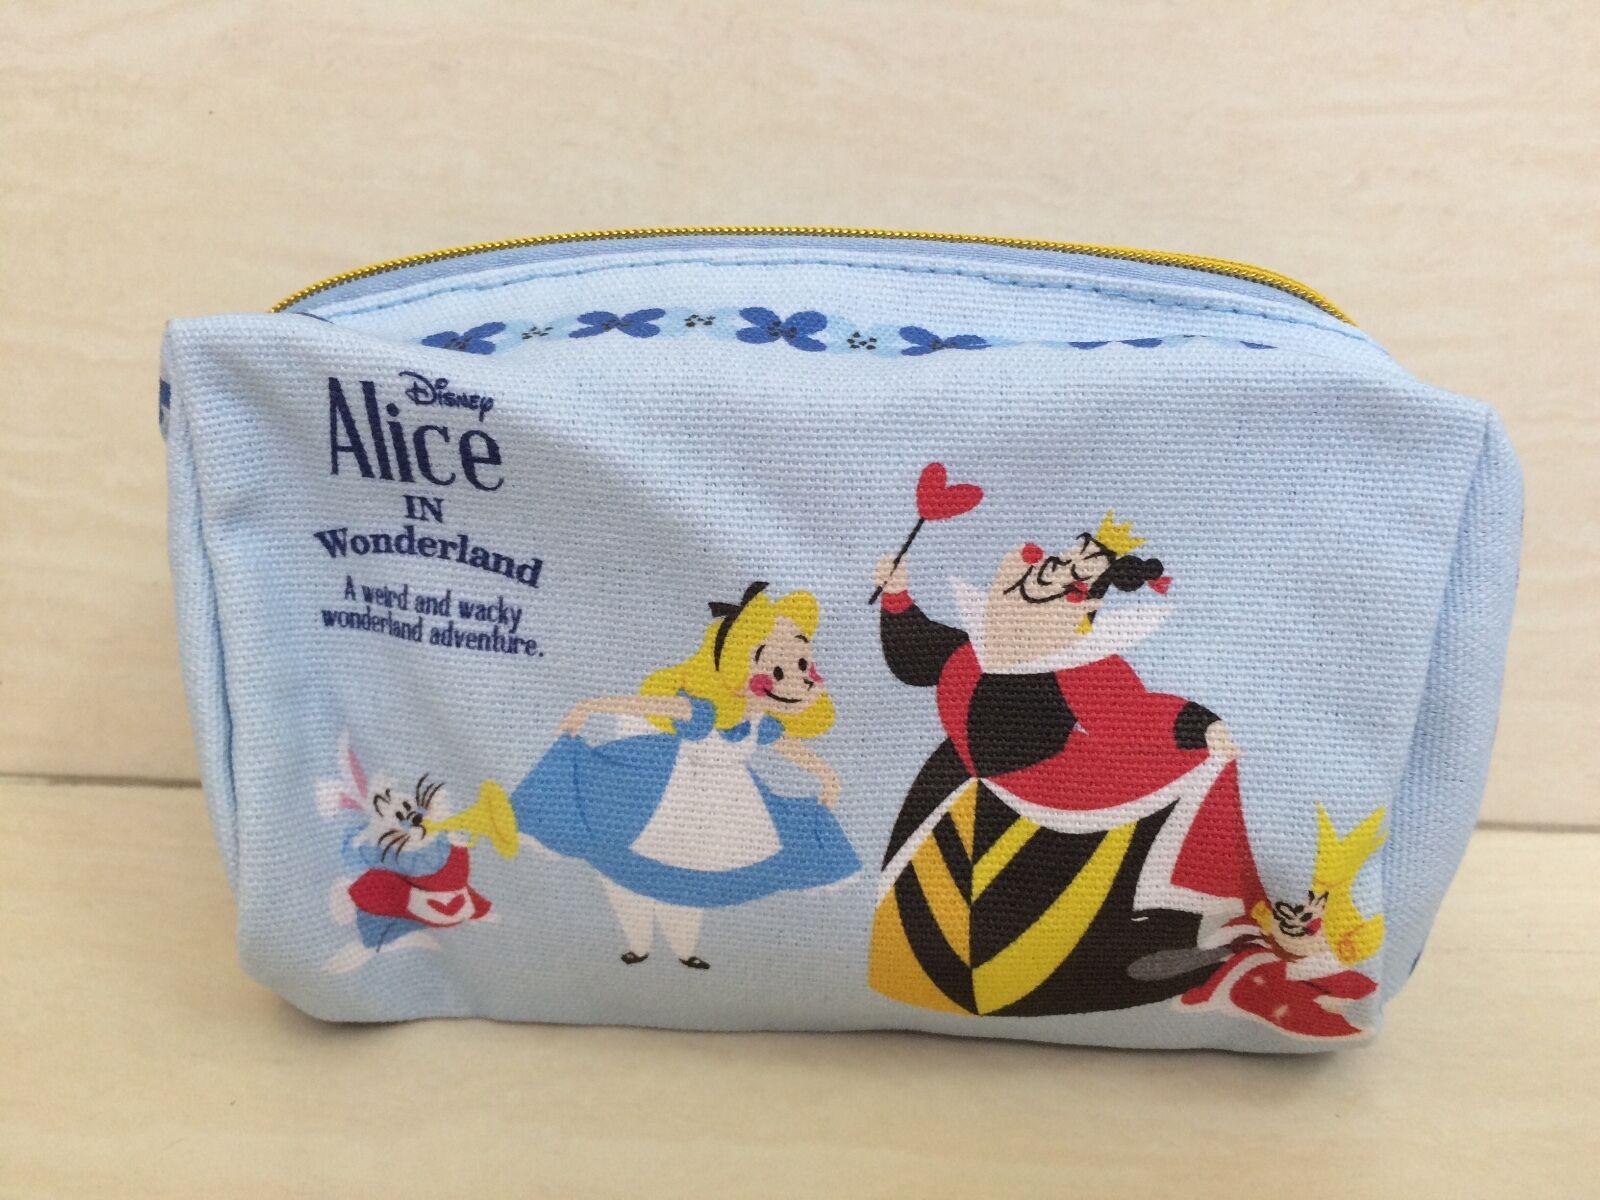 Disney Alice Cloth Clutch bag. From Alice in wonderland. Blue THEME. Rare NEW - $35.00